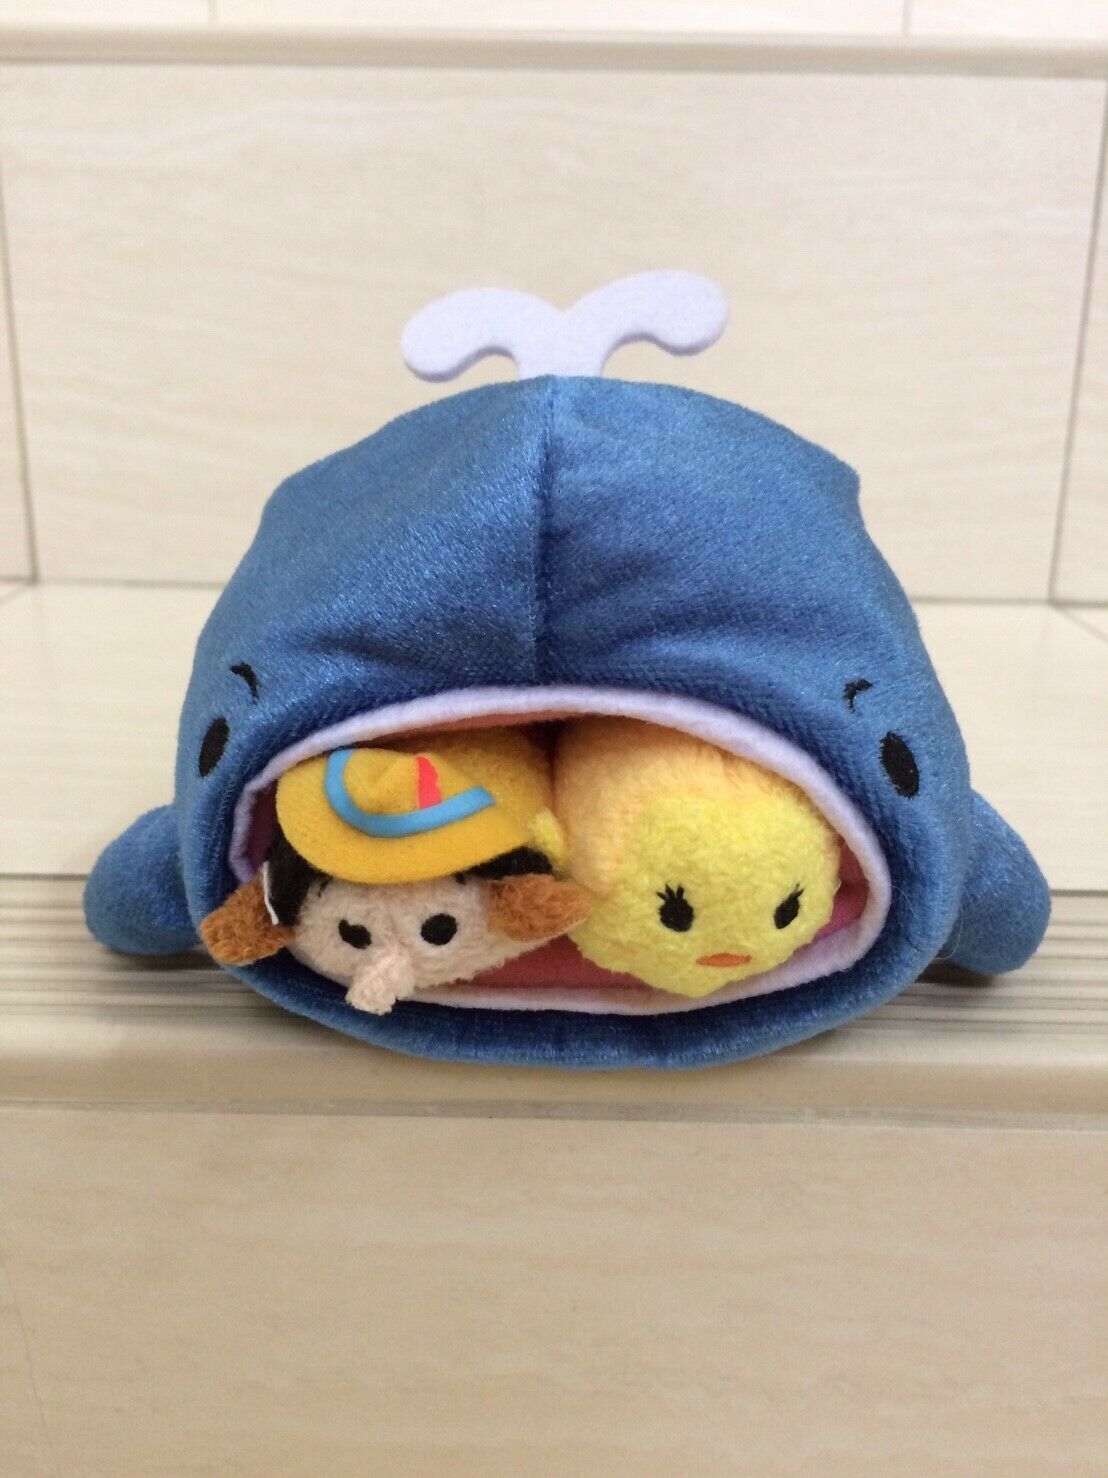 Primary image for Disney Pinocchio, Cleo in Whale Tsum Tsum Plush Doll. Limited, Pretty And Rare